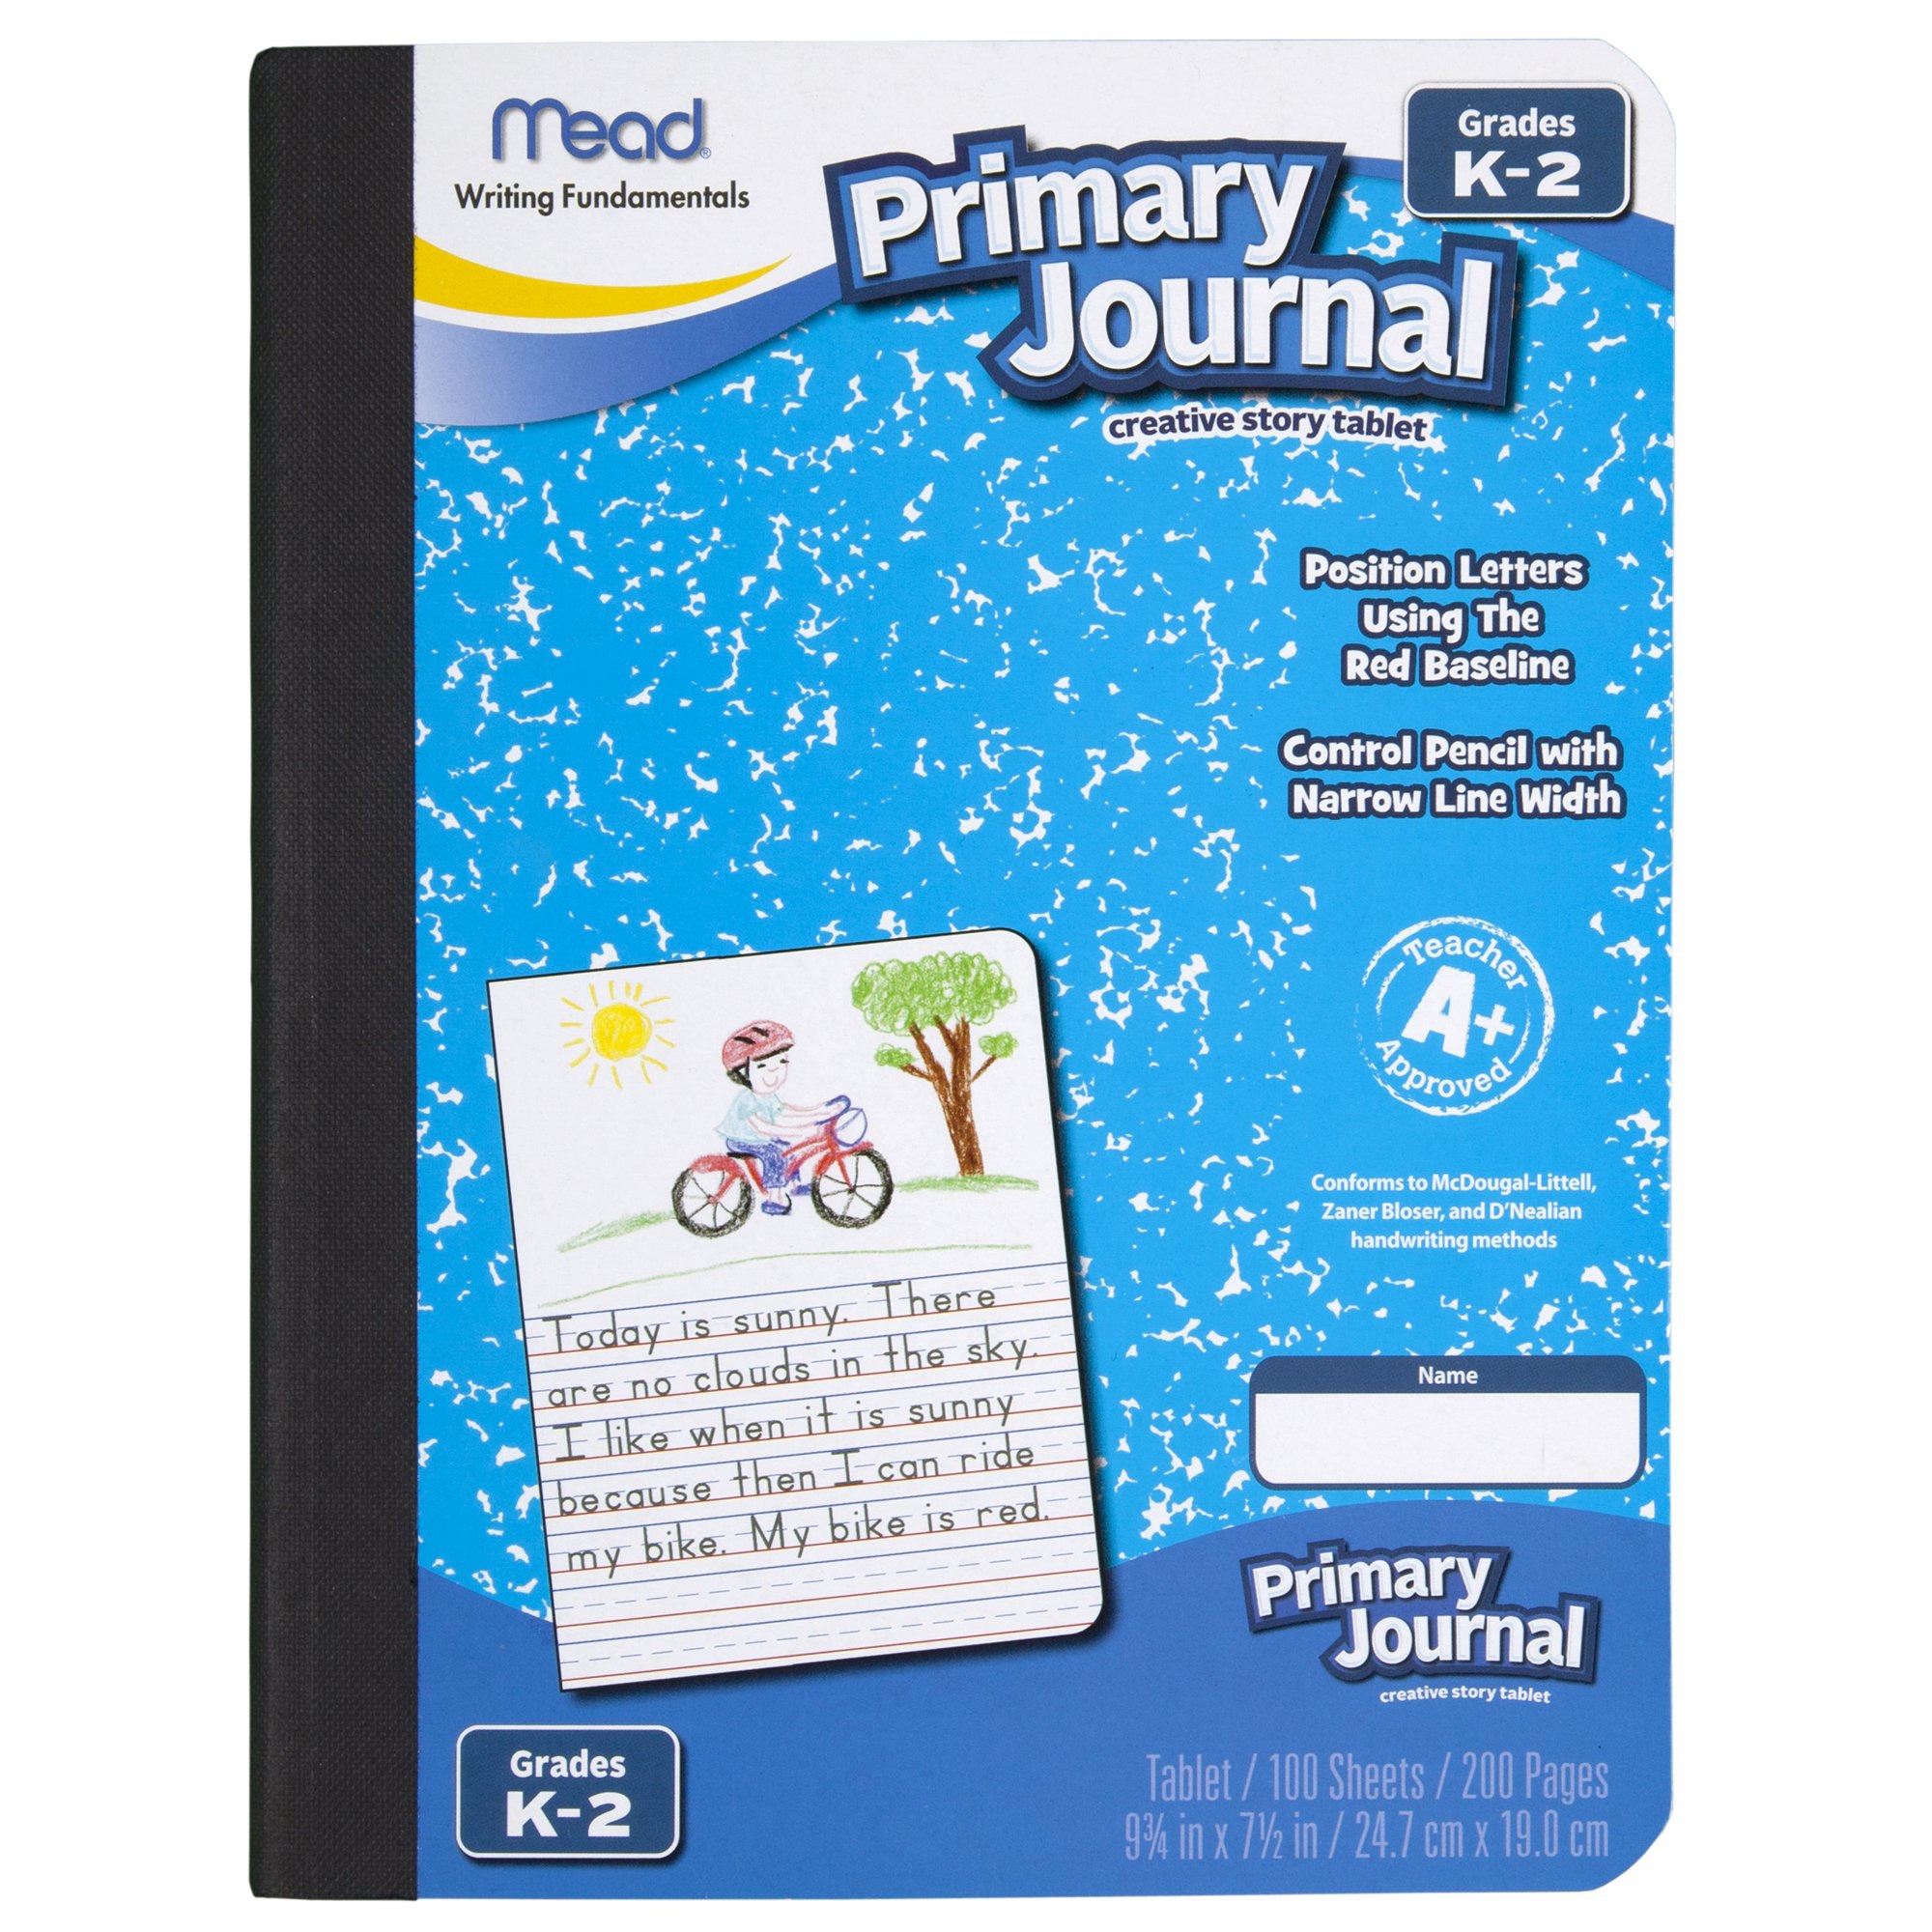 Mead Primary 日记本, Half Page Ruled, Grades K-2, 100 Sheets (09535)- Walmart.com